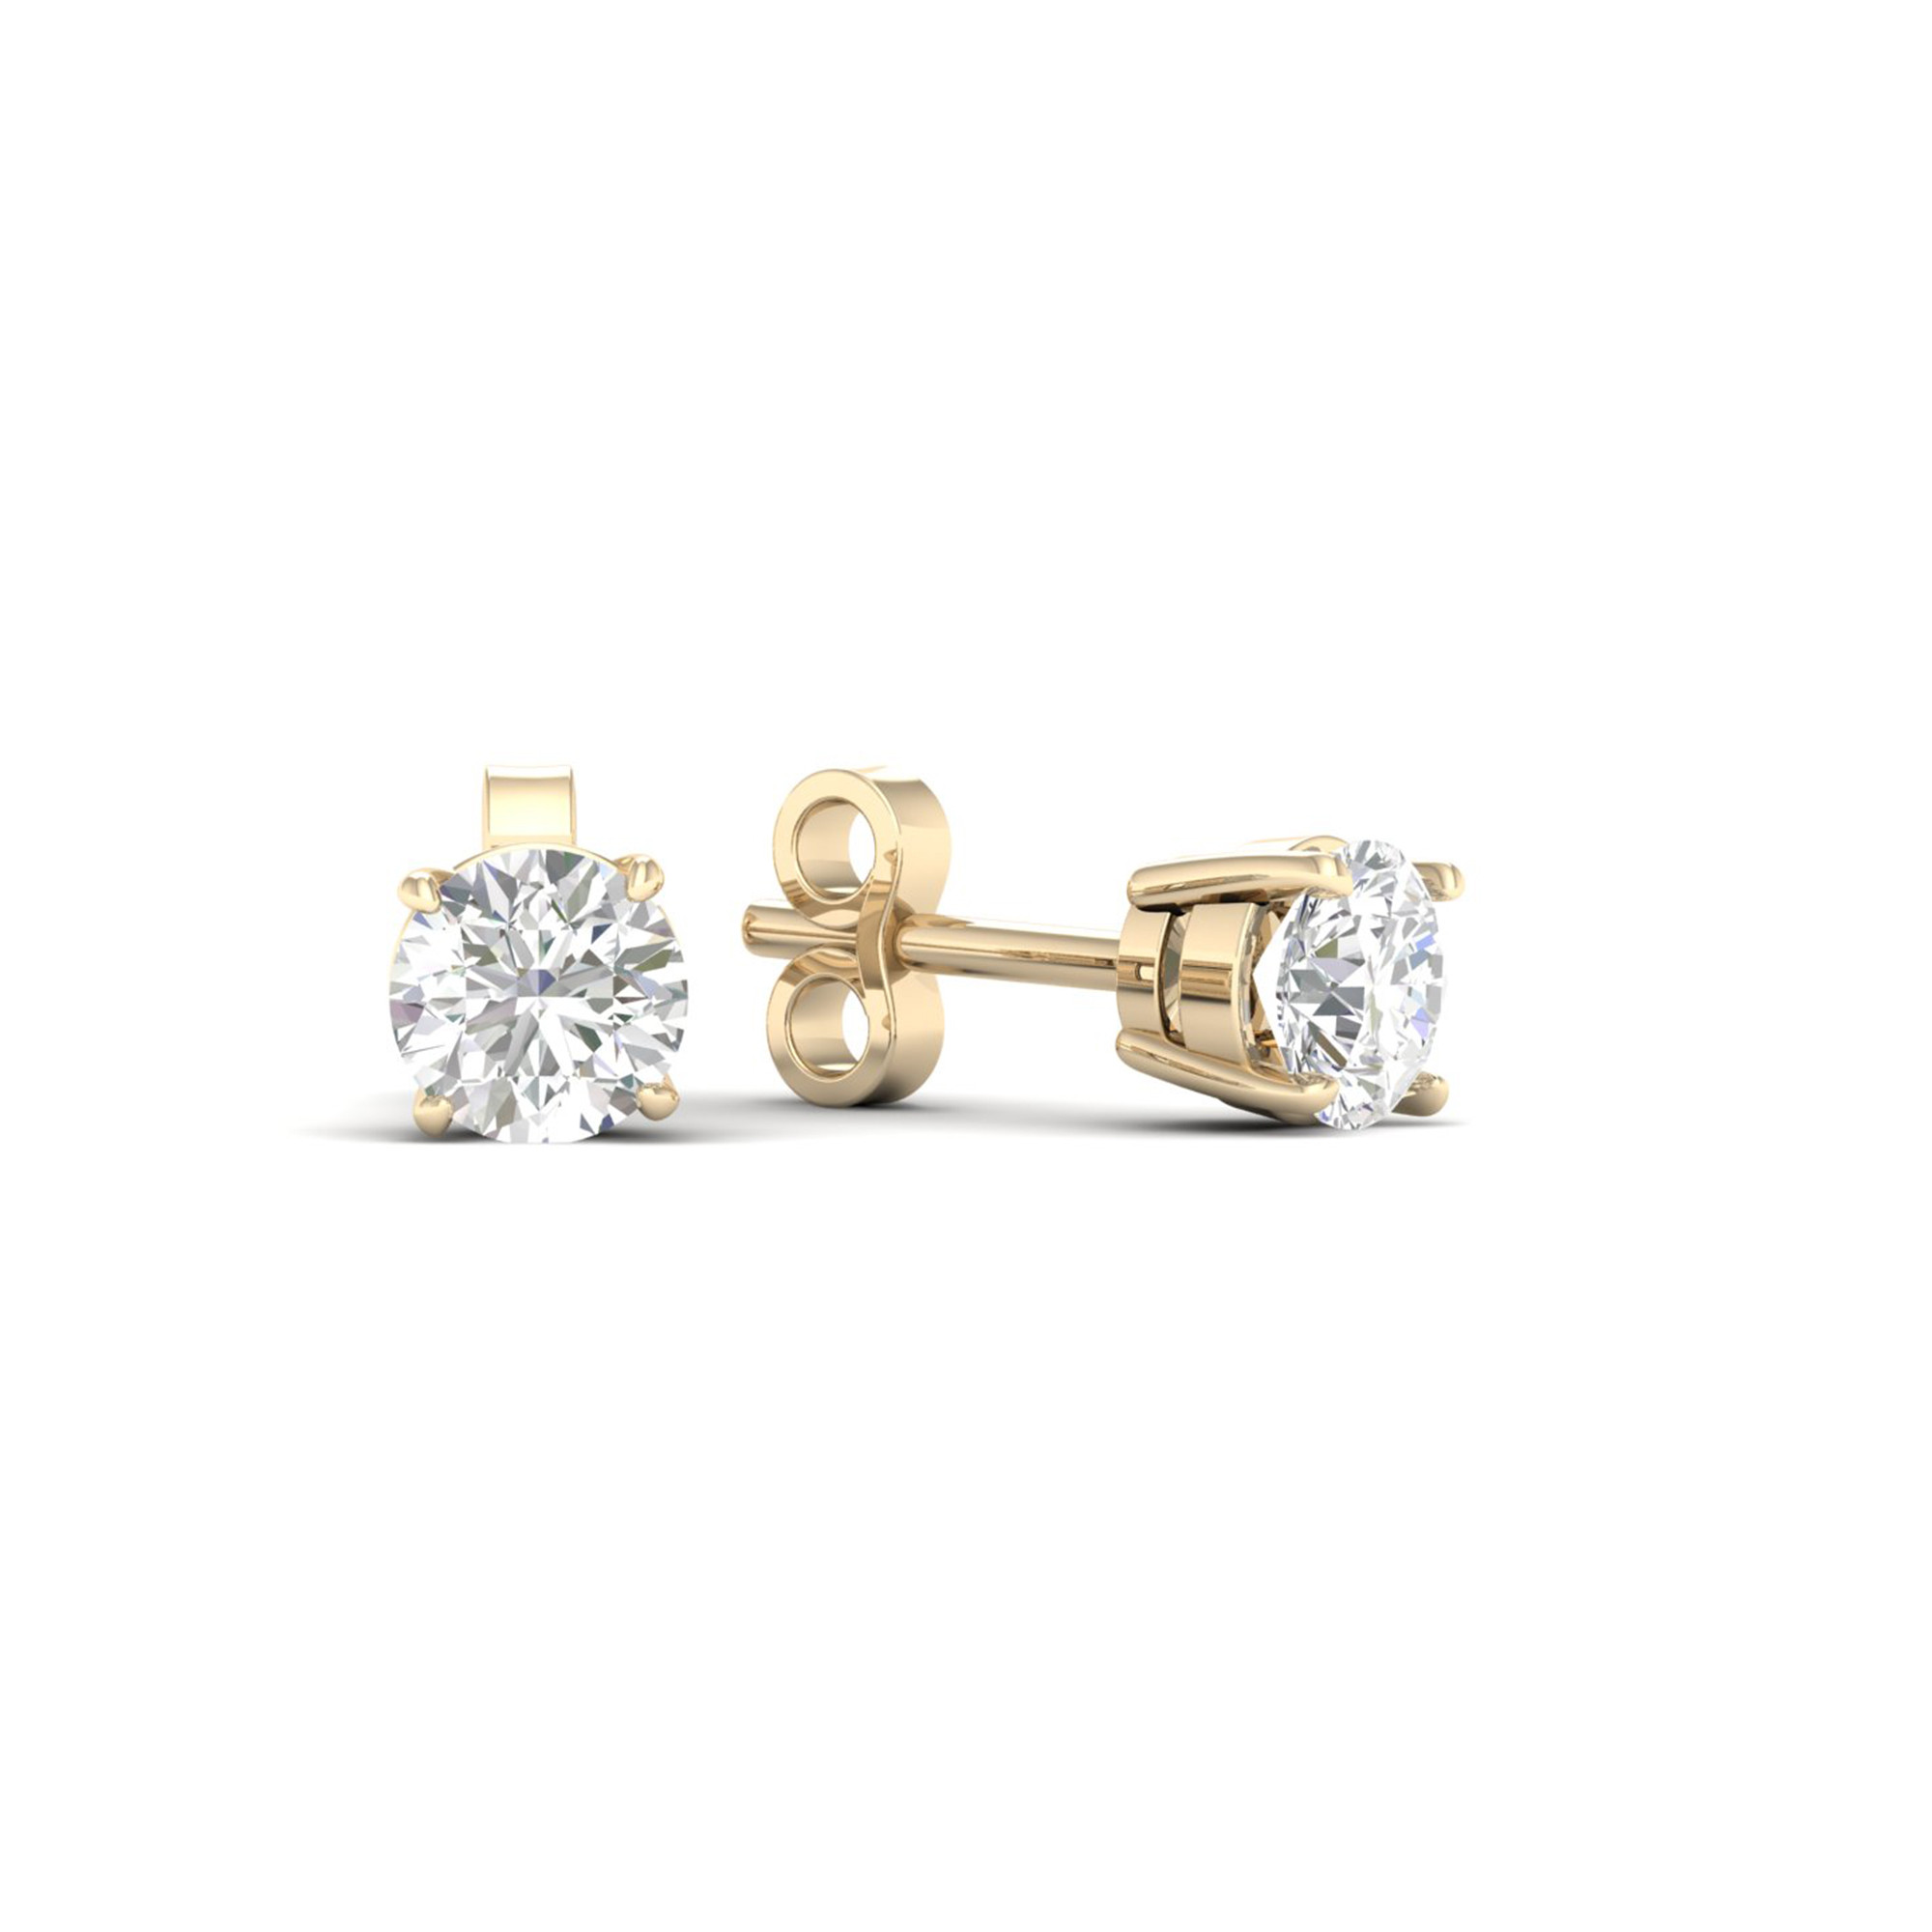 Walmart Gold Earrings
 Imperial 1 6Ct TDW Diamond 10K Yellow Gold Solitaire